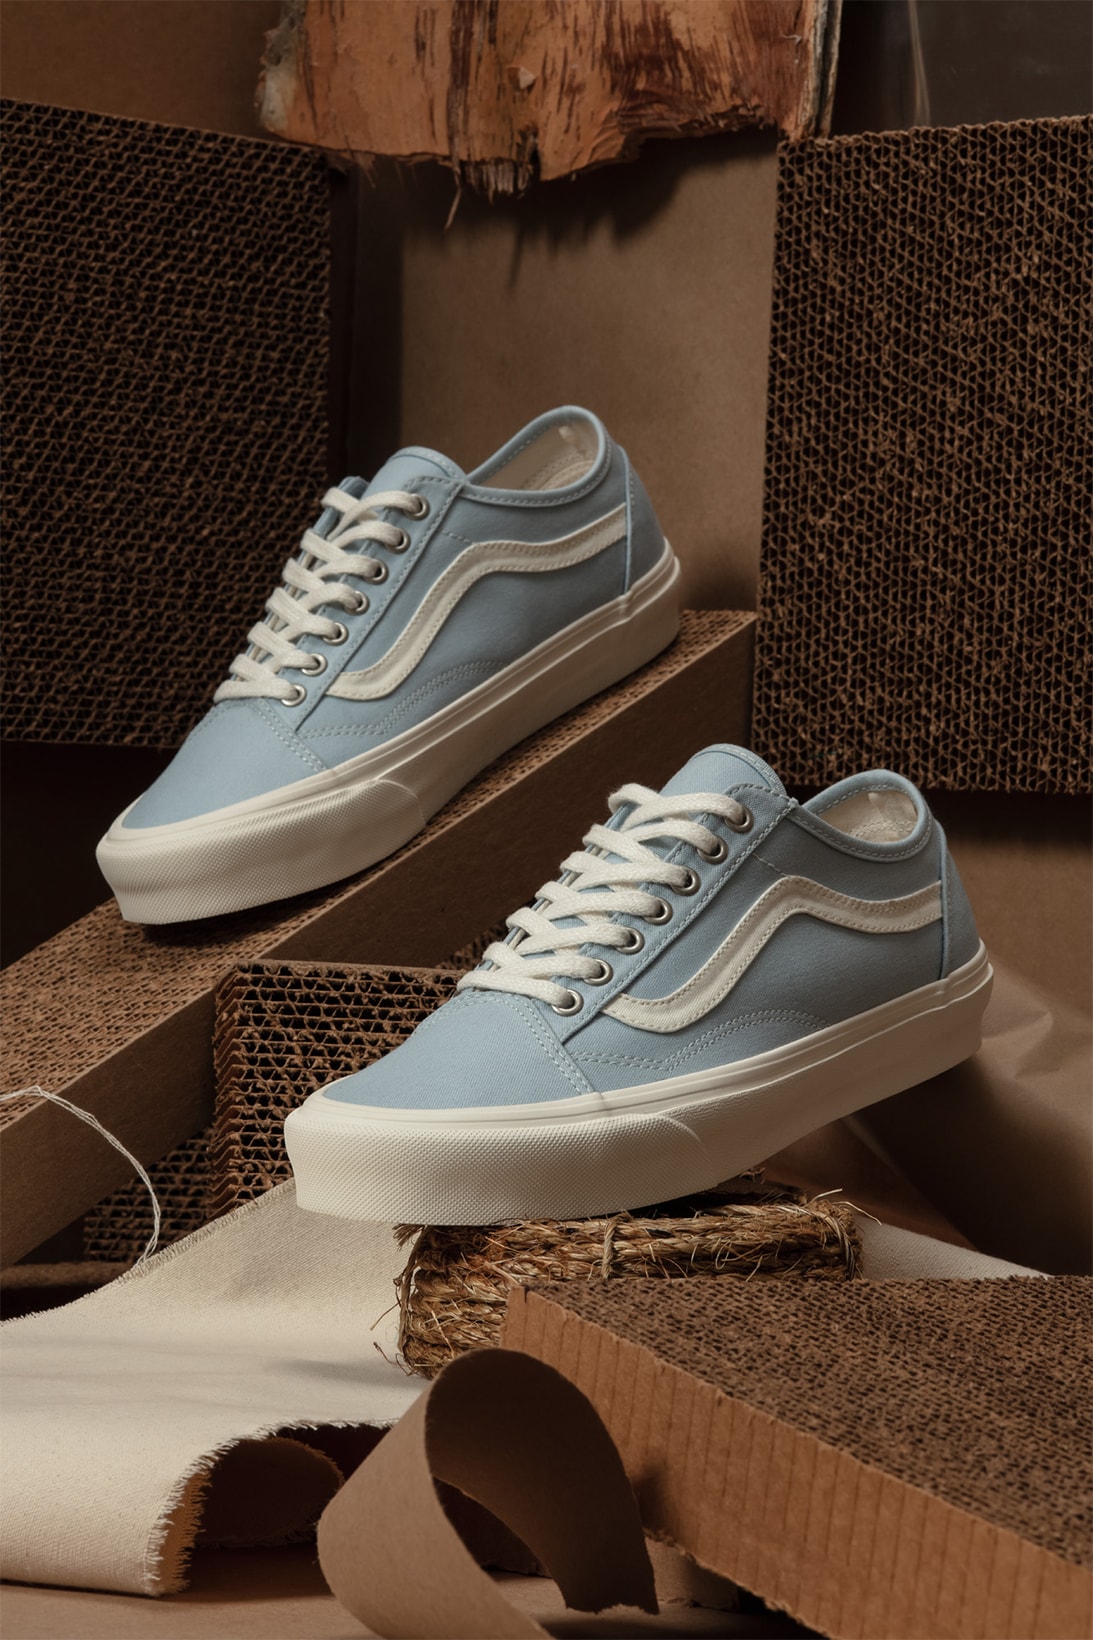 Vans Eco Theory Old Skool Decon Collection Sneakers Footwear Shoes Sustainable Sky Blue White